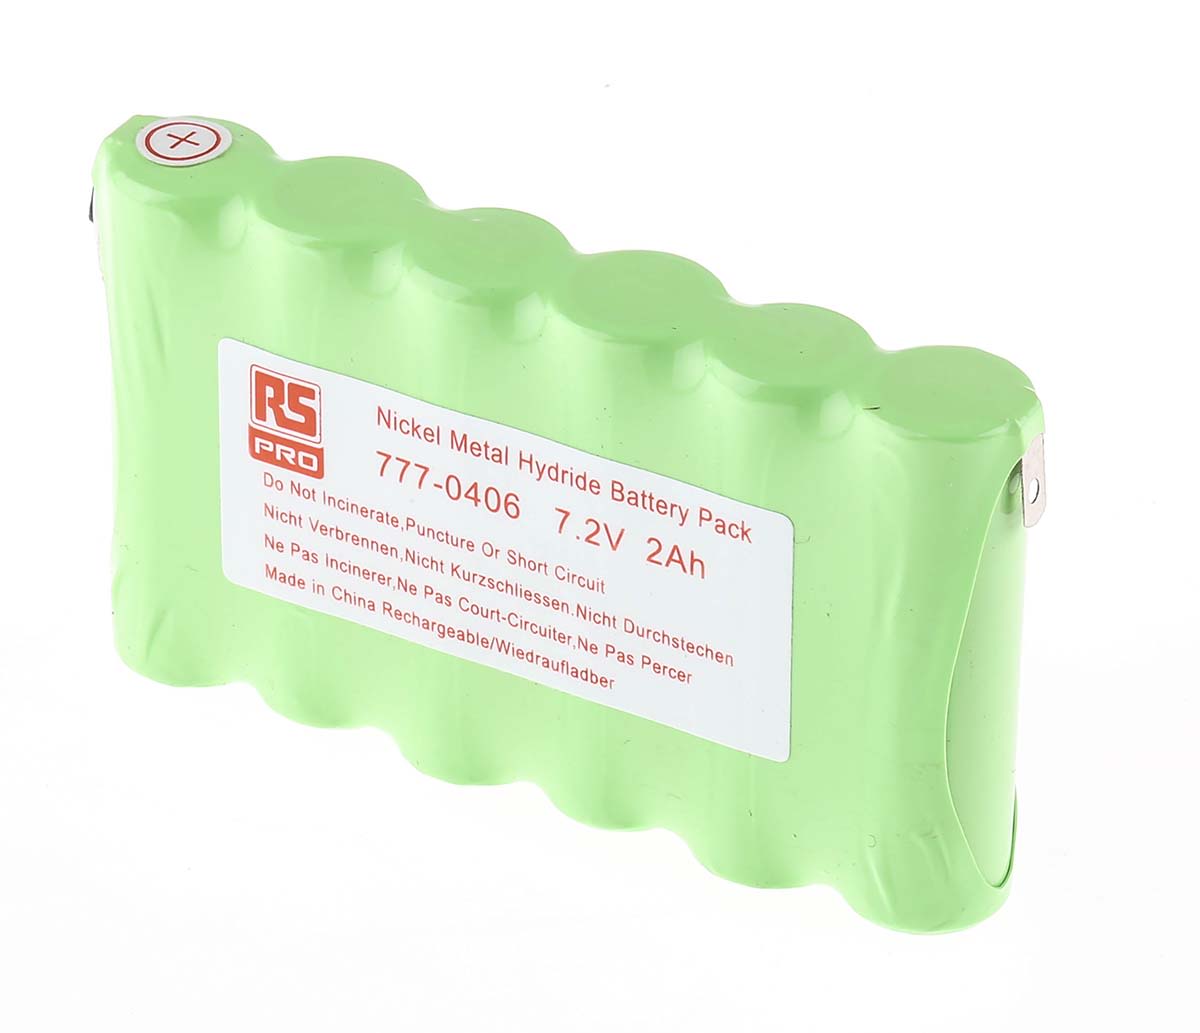 RS PRO 7.2V NiMH Rechargeable Battery Pack, 2Ah - Pack of 1